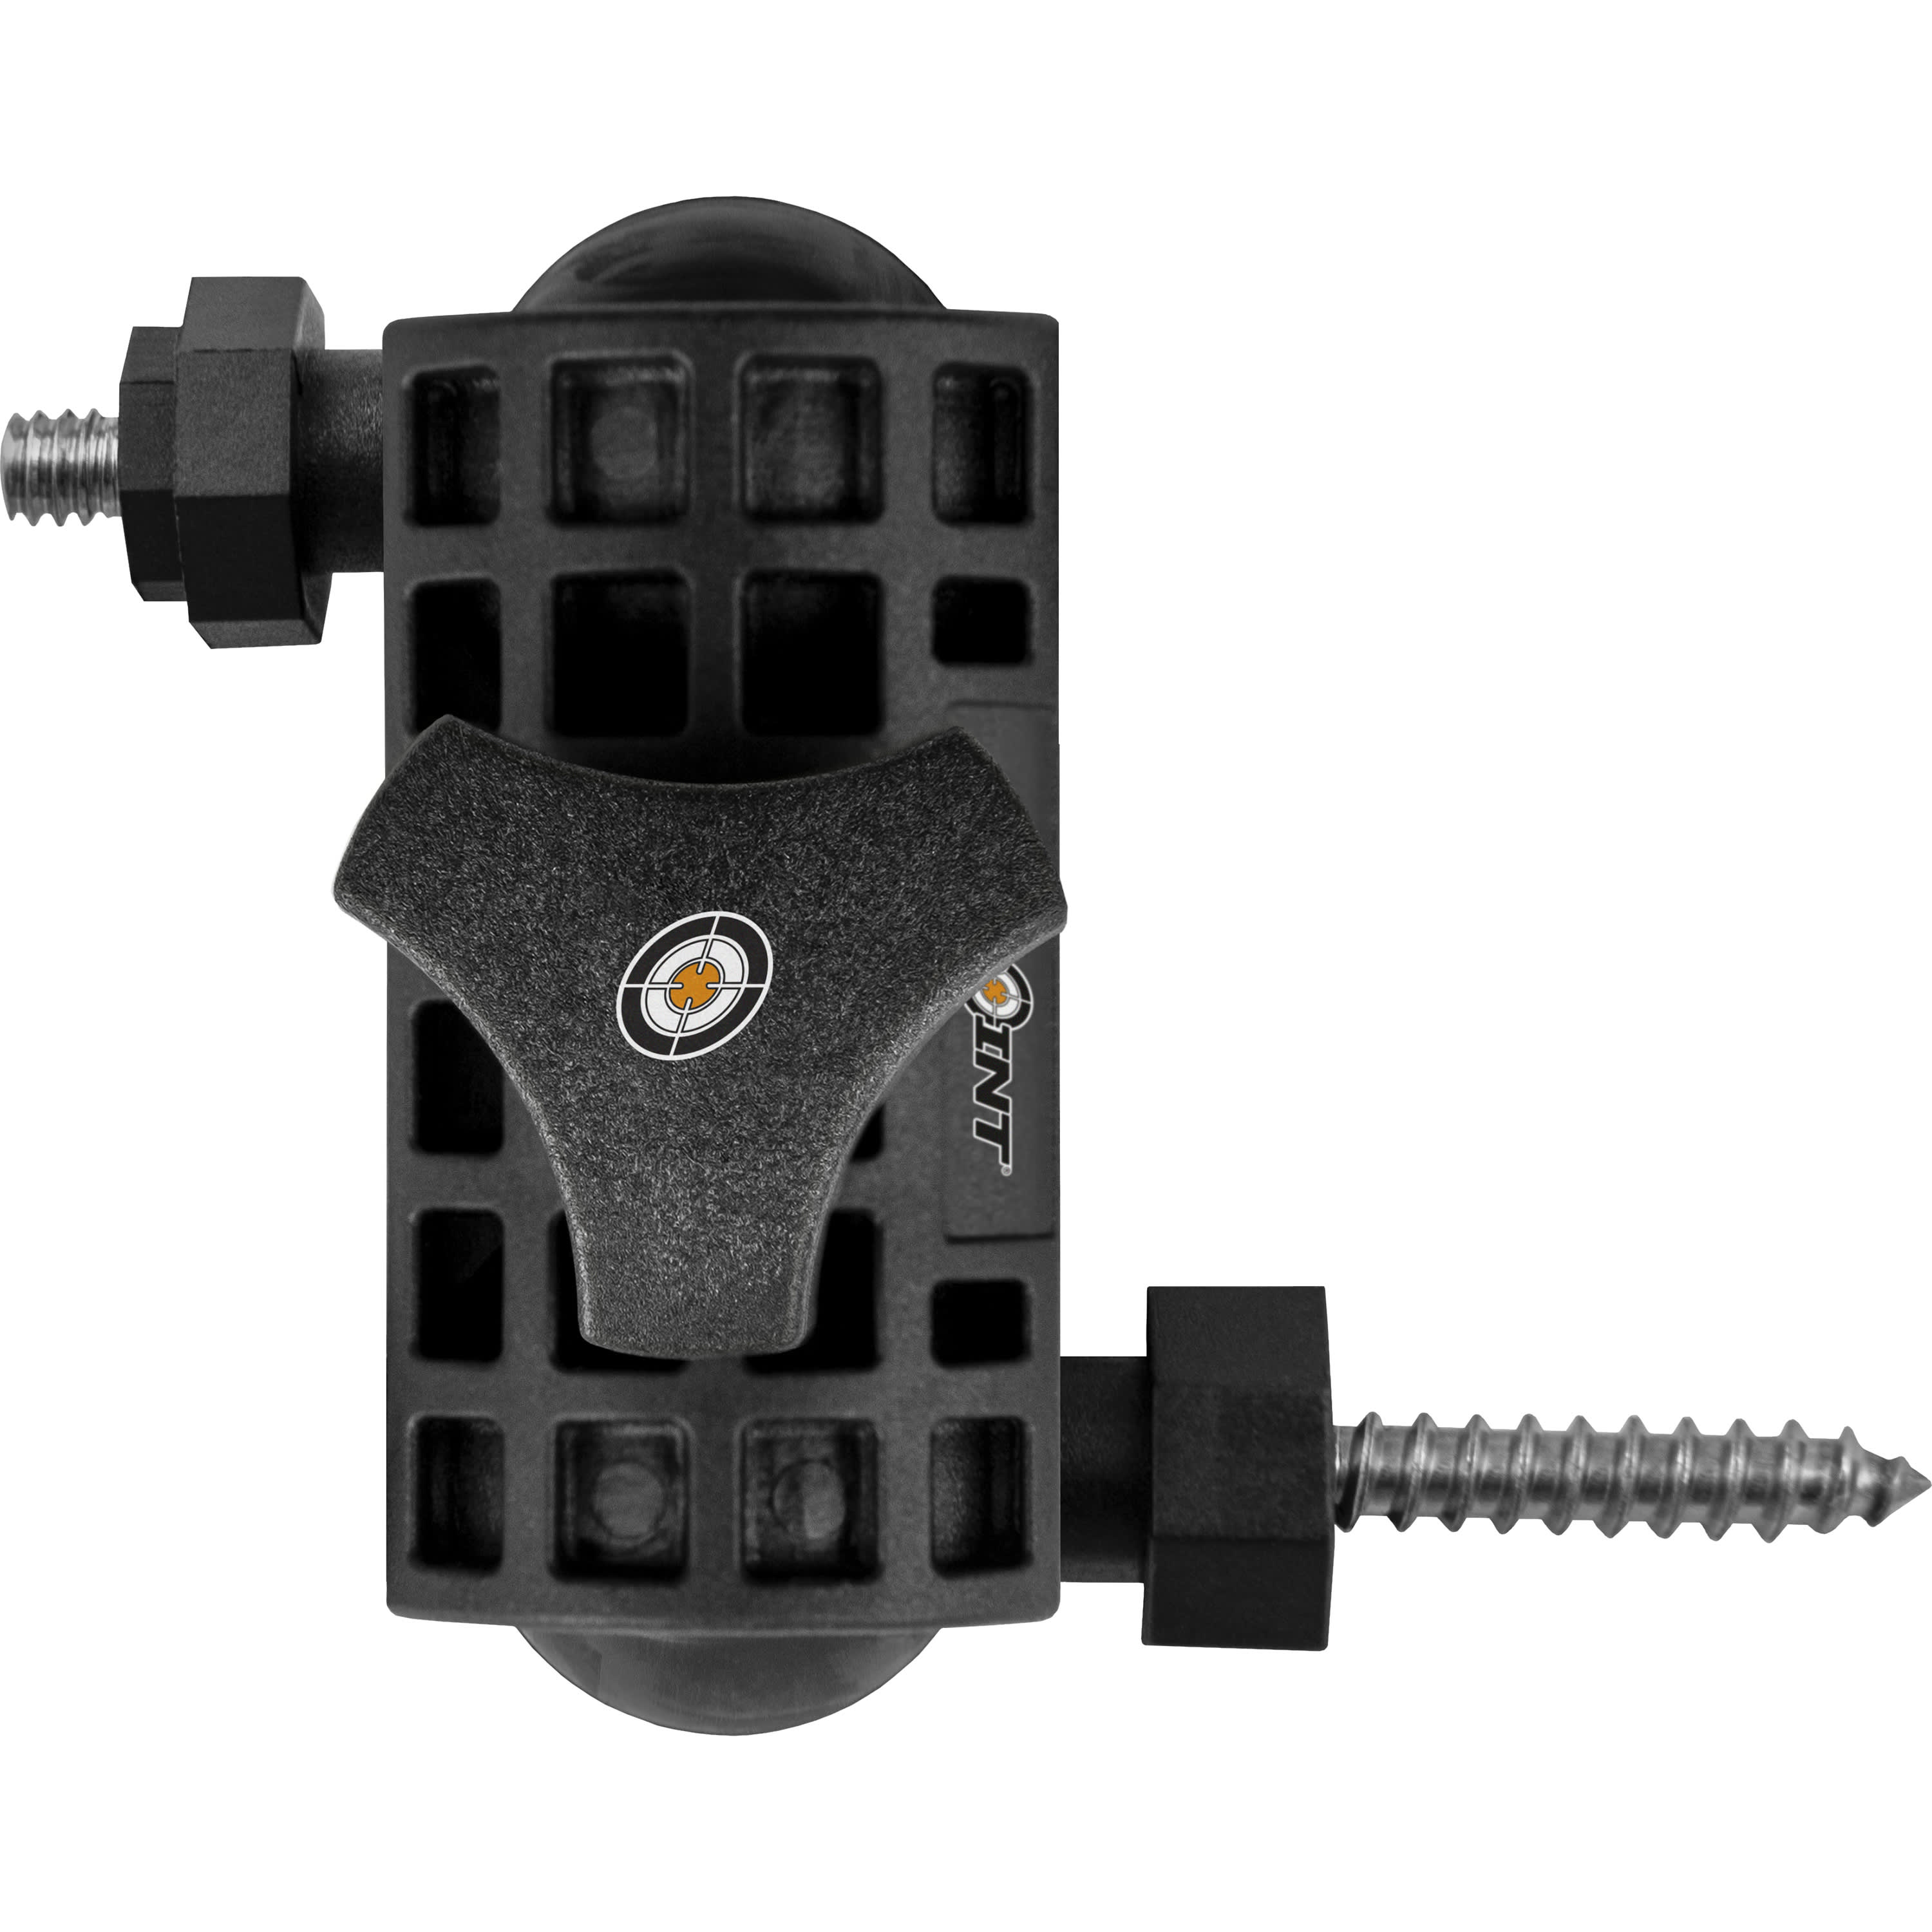 SPYPOINT® Adjustable Mounting Arm